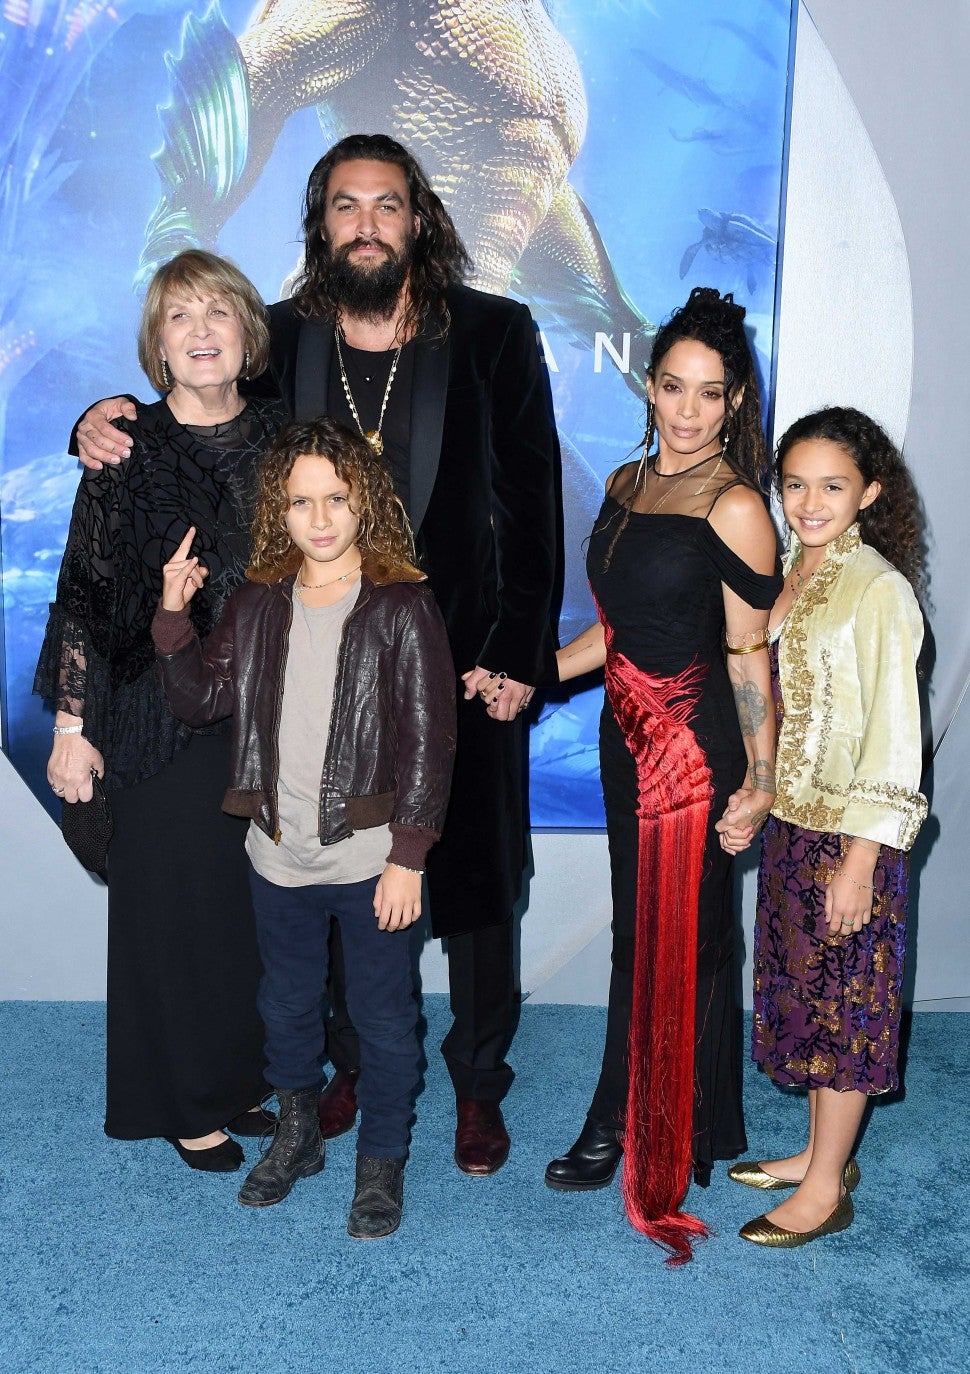 Jason Momoa and his family at the 'Aquaman' premiere at the Chinese Theatre in Hollywood on Dec. 12